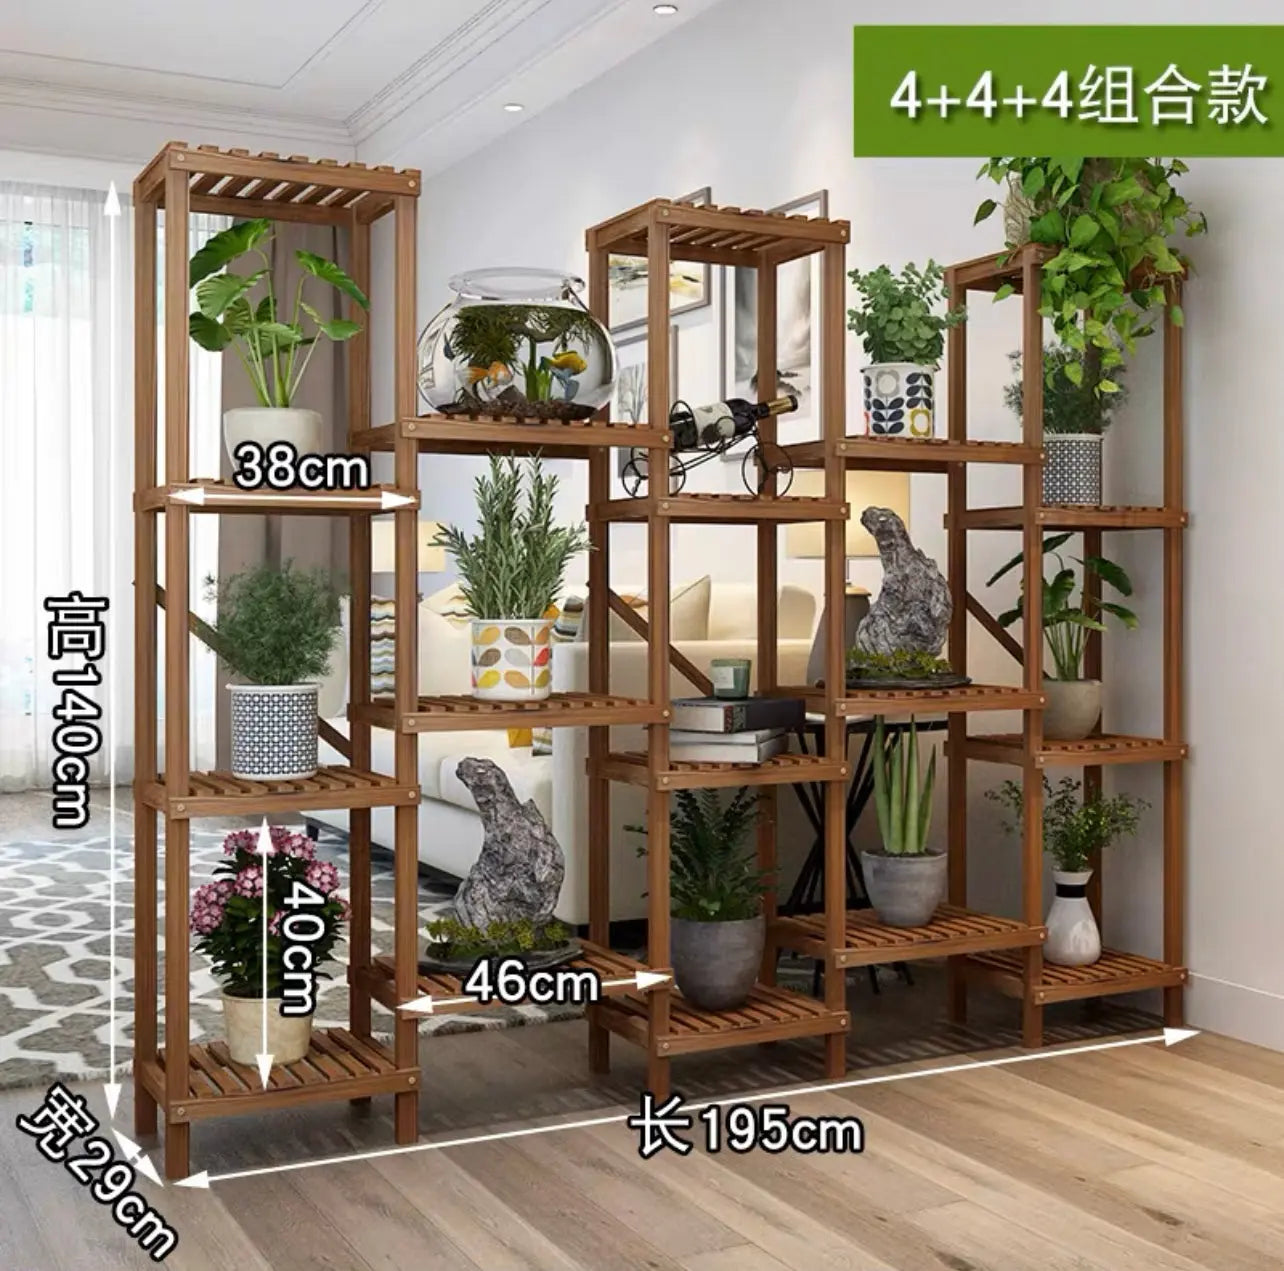 Large Wooden Shelf Plant Stand Divider Display Balcony Pot Stand Ladder Solid Timber Elegant Indoor Outdoor everythingbamboo